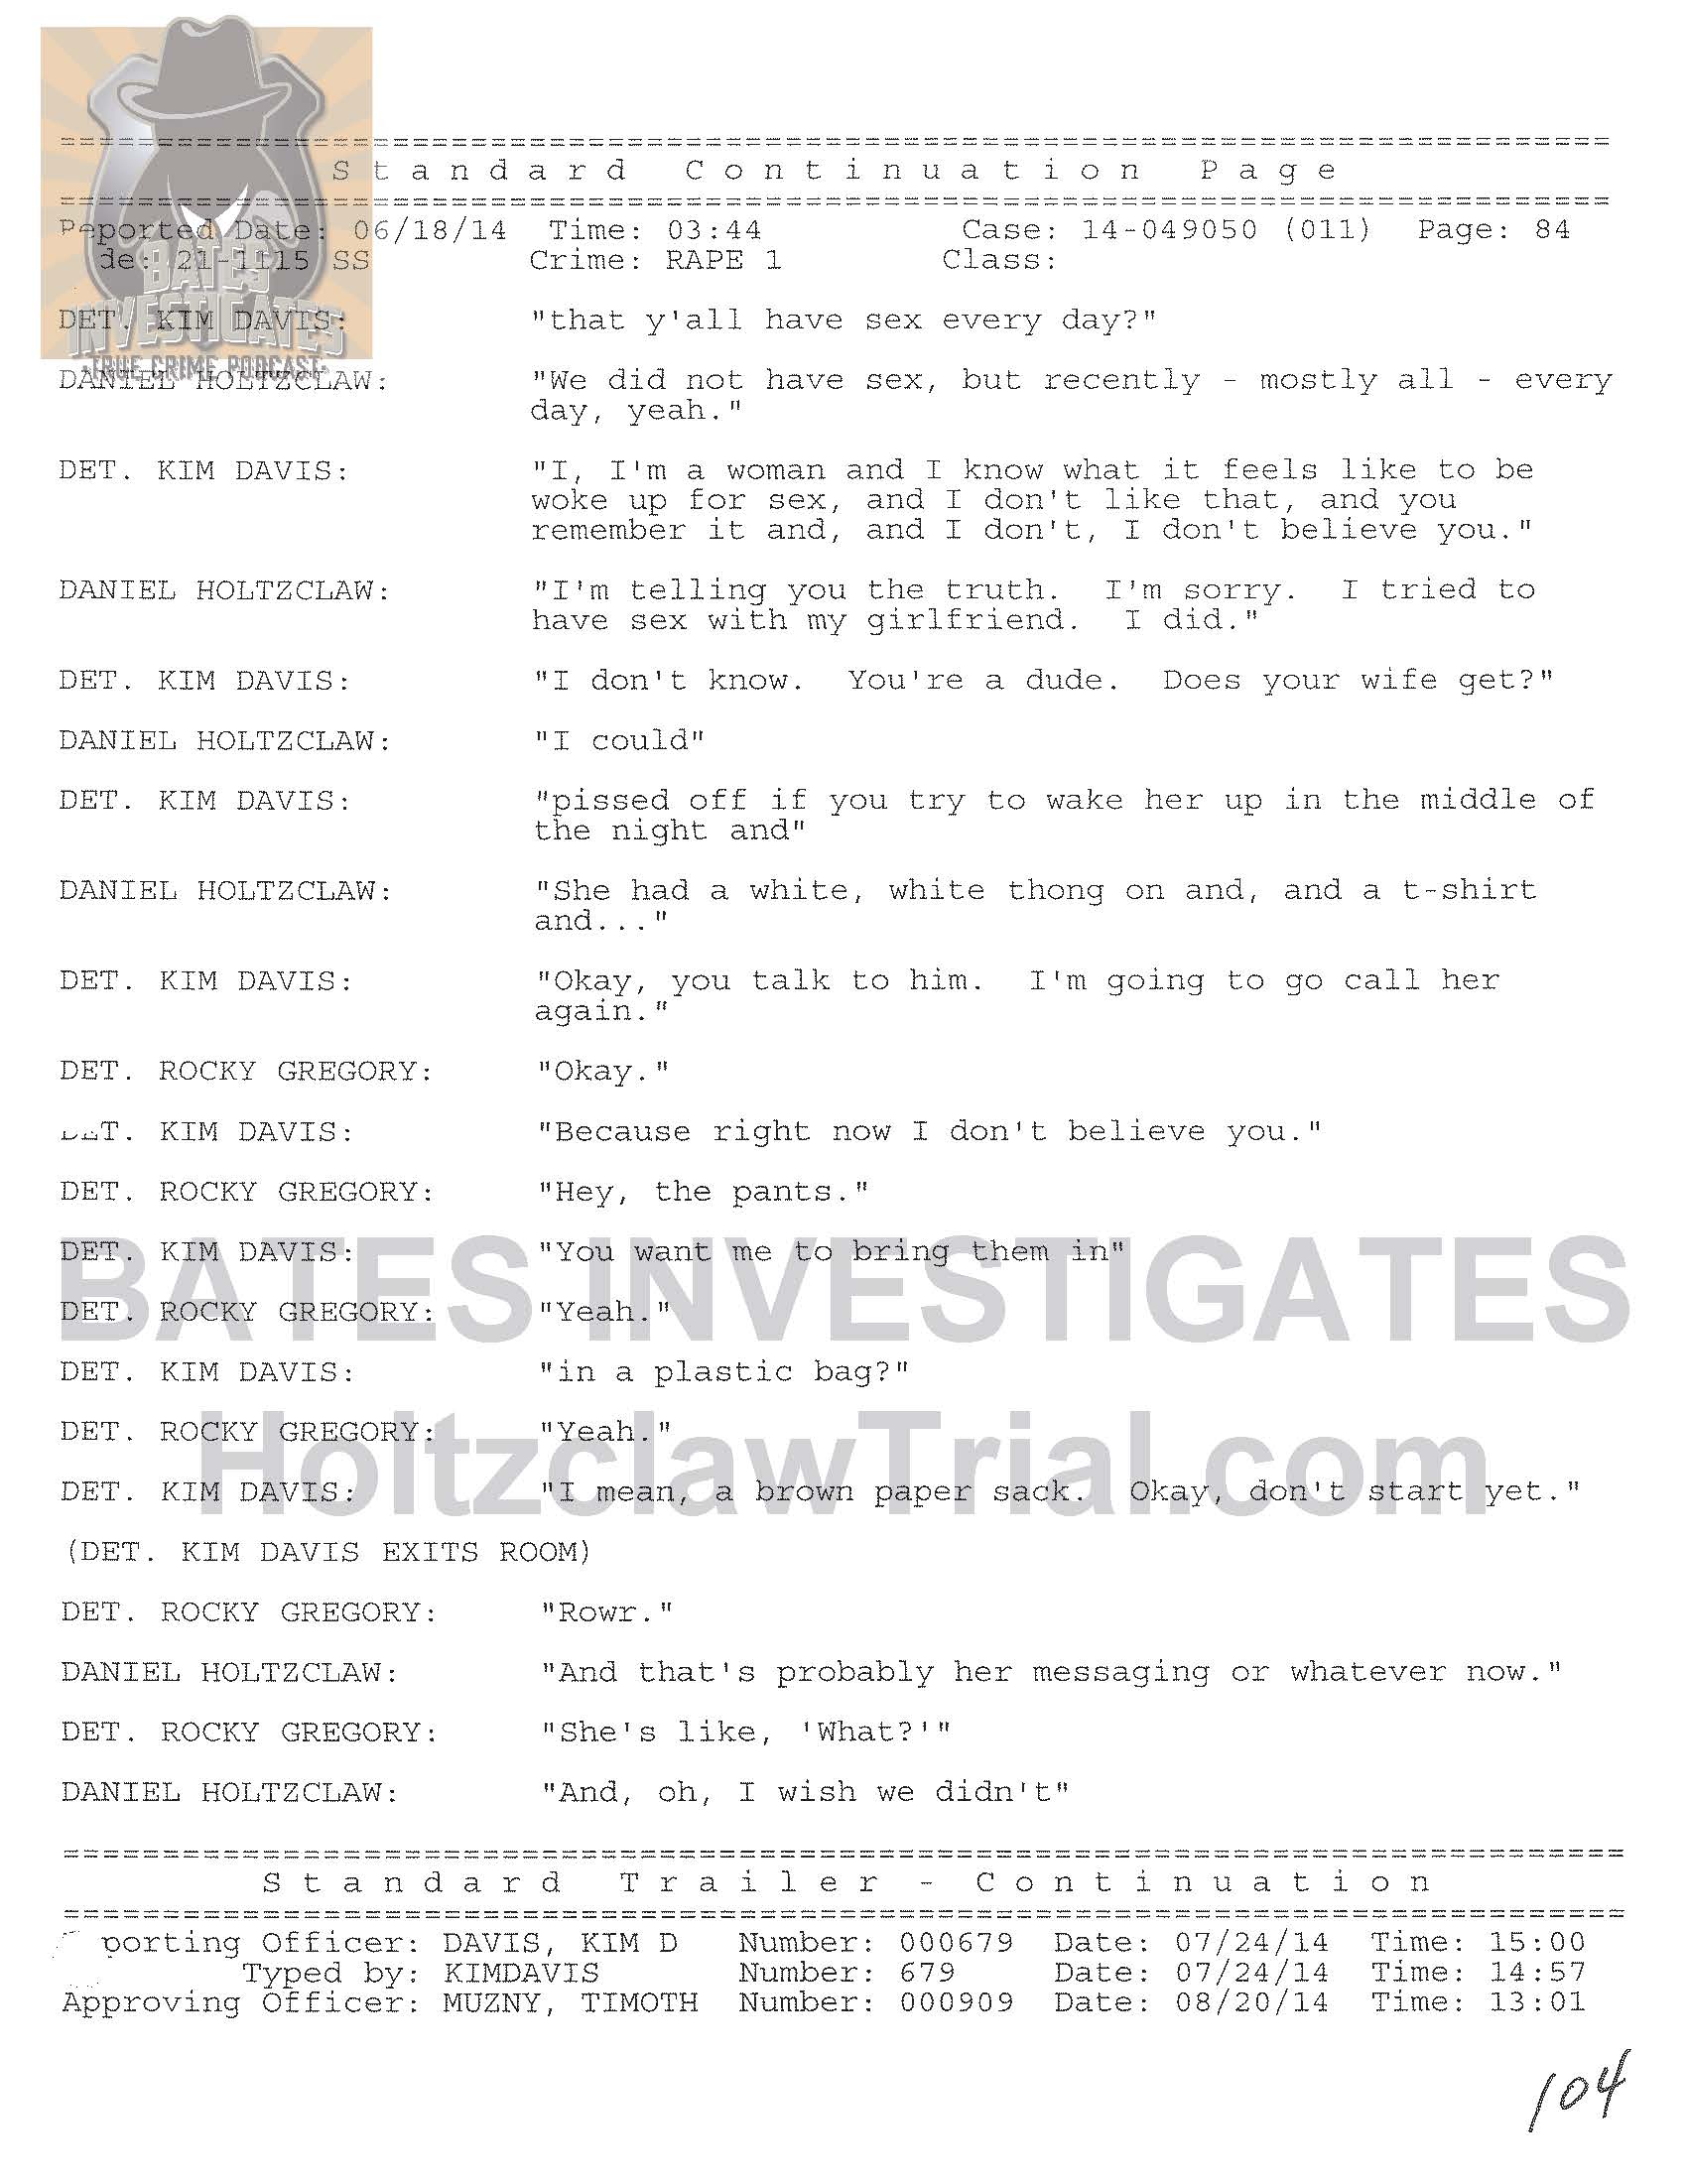 Holtzclaw Interrogation Transcript - Ep02 Redacted_Page_84.jpg